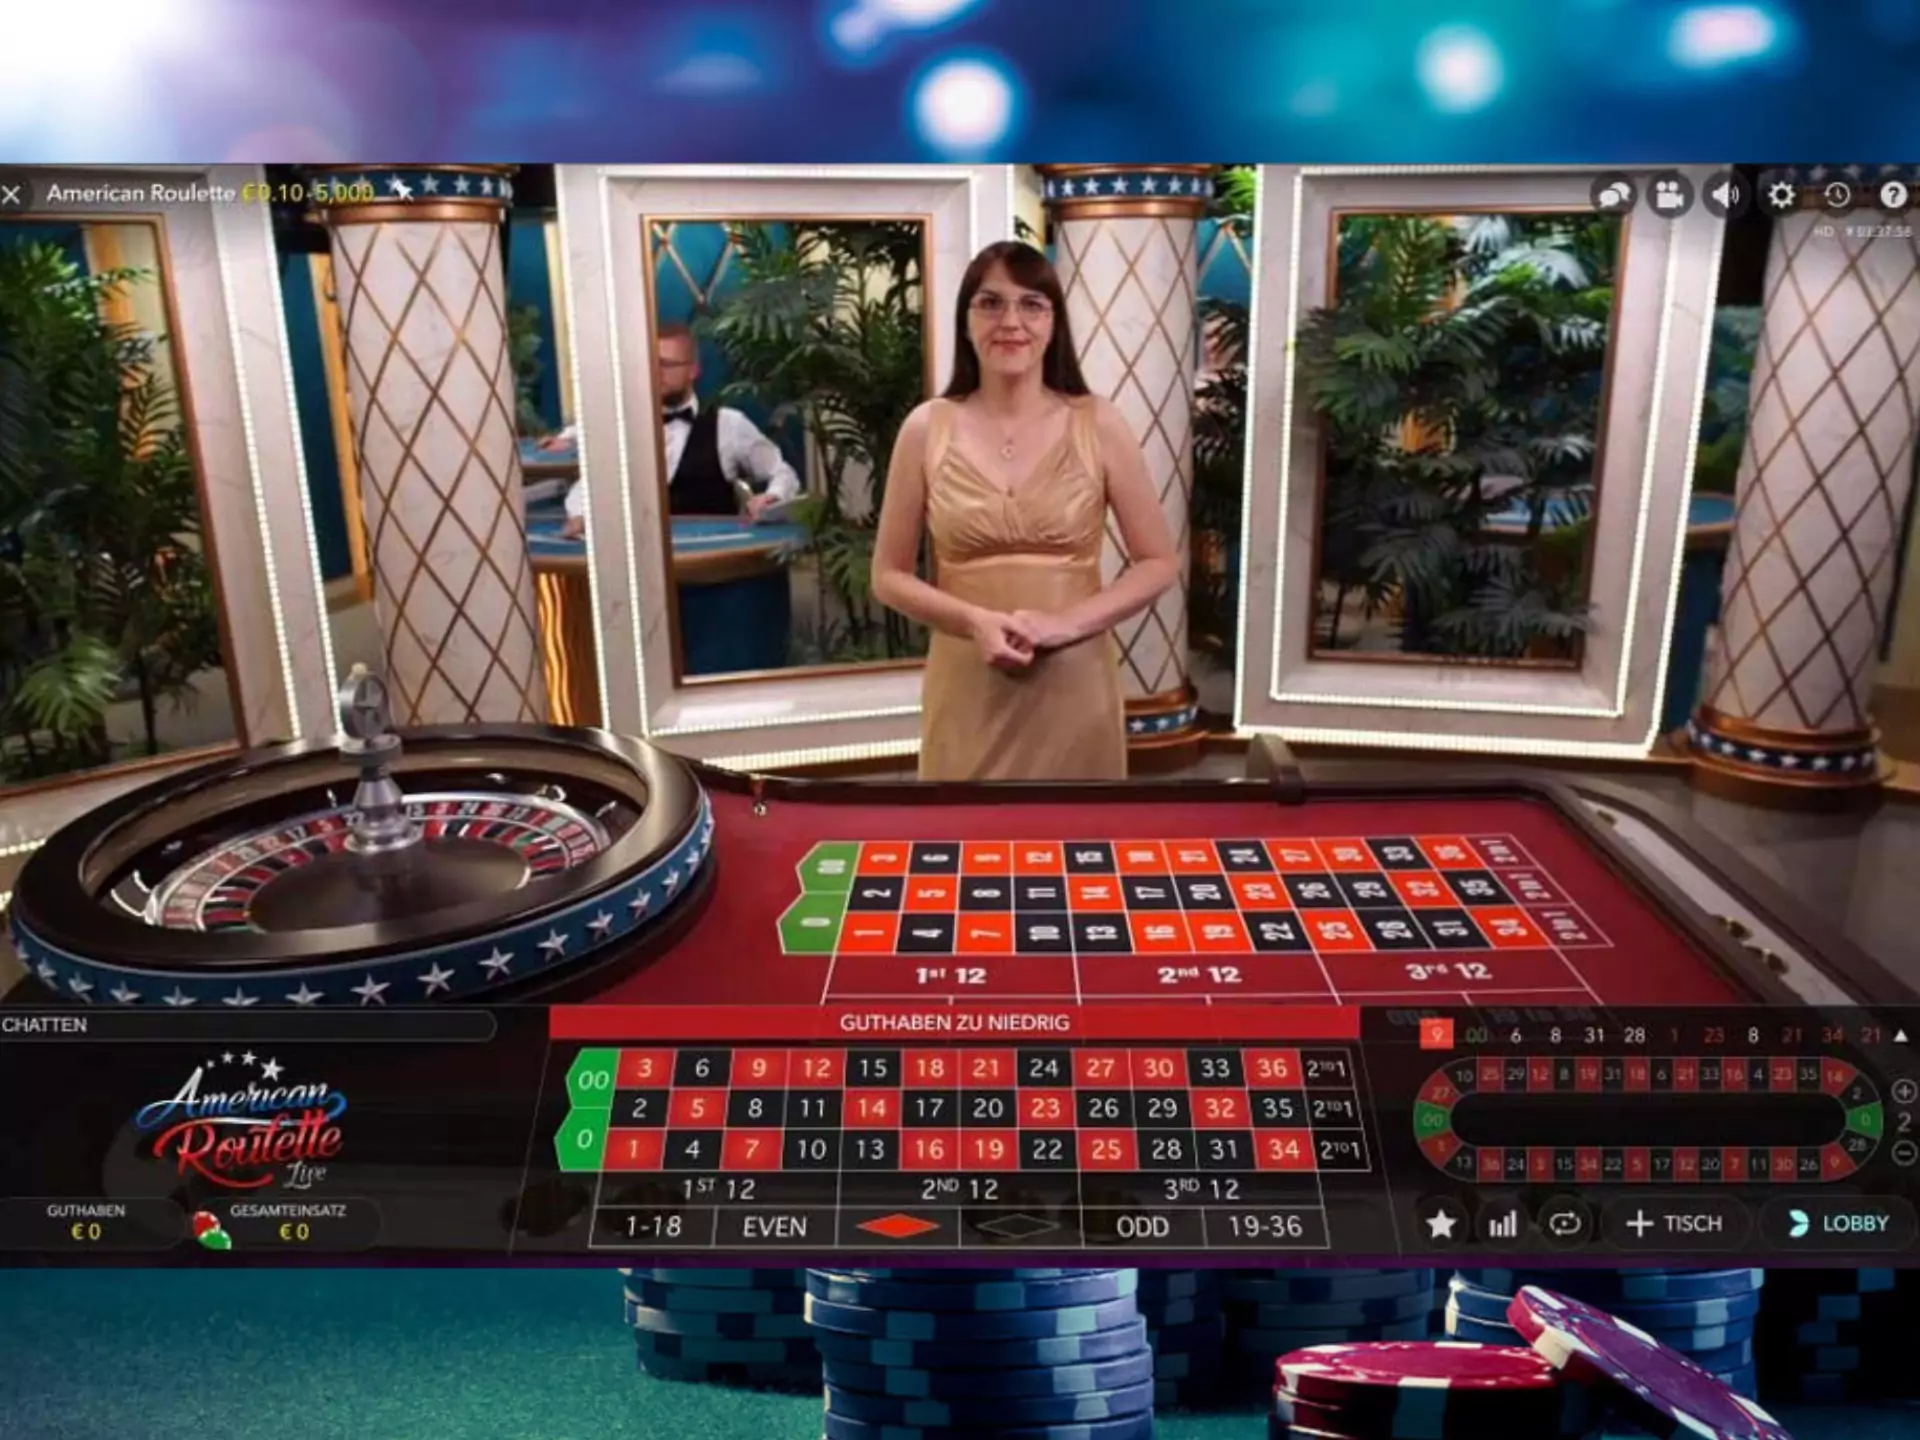 Sign up for an online casino and play American roulette.